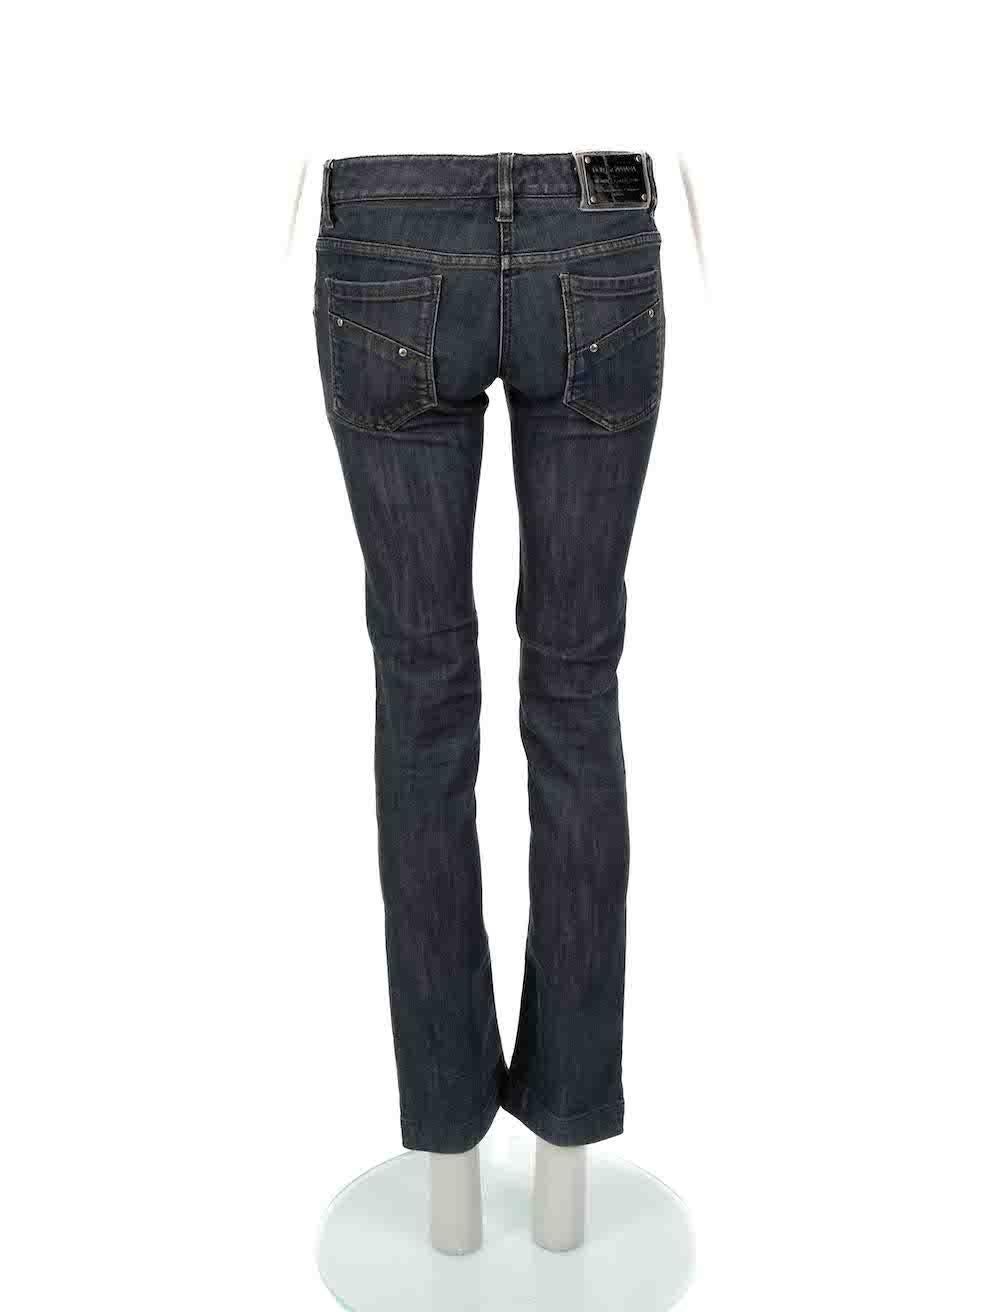 Dolce & Gabbana Navy Denim Skinny Jeans Size S In Excellent Condition For Sale In London, GB